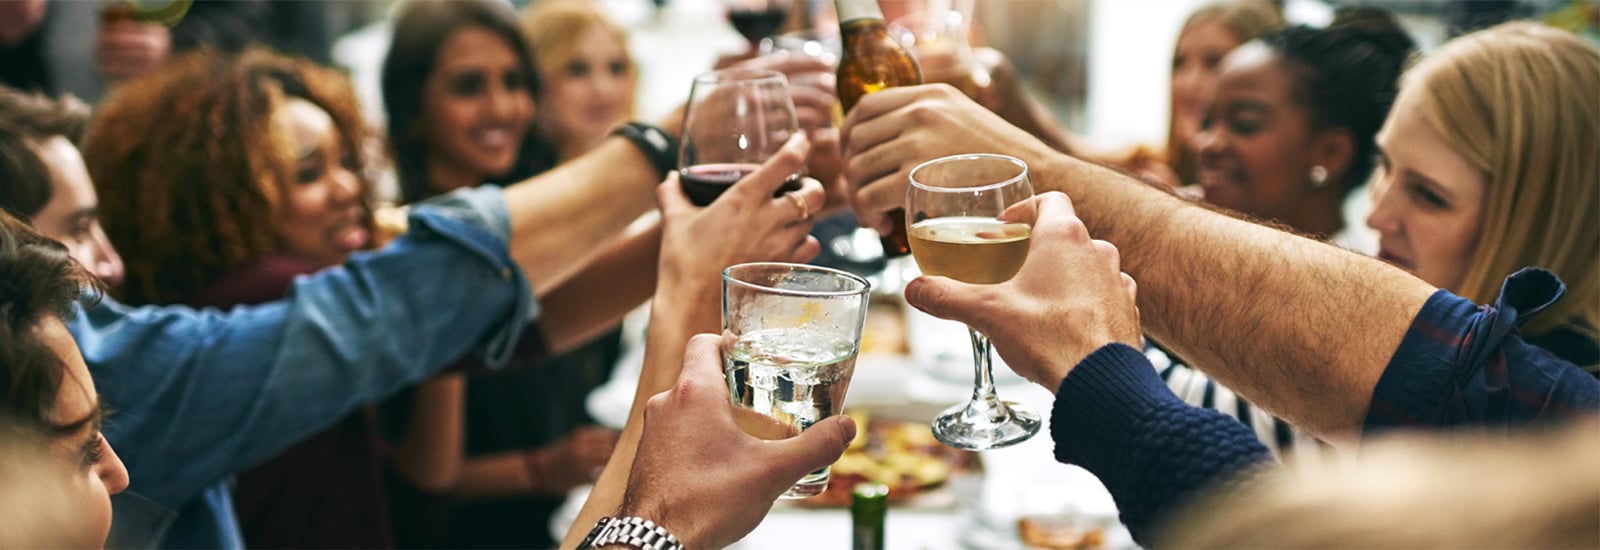 Group drinking a toast at a party